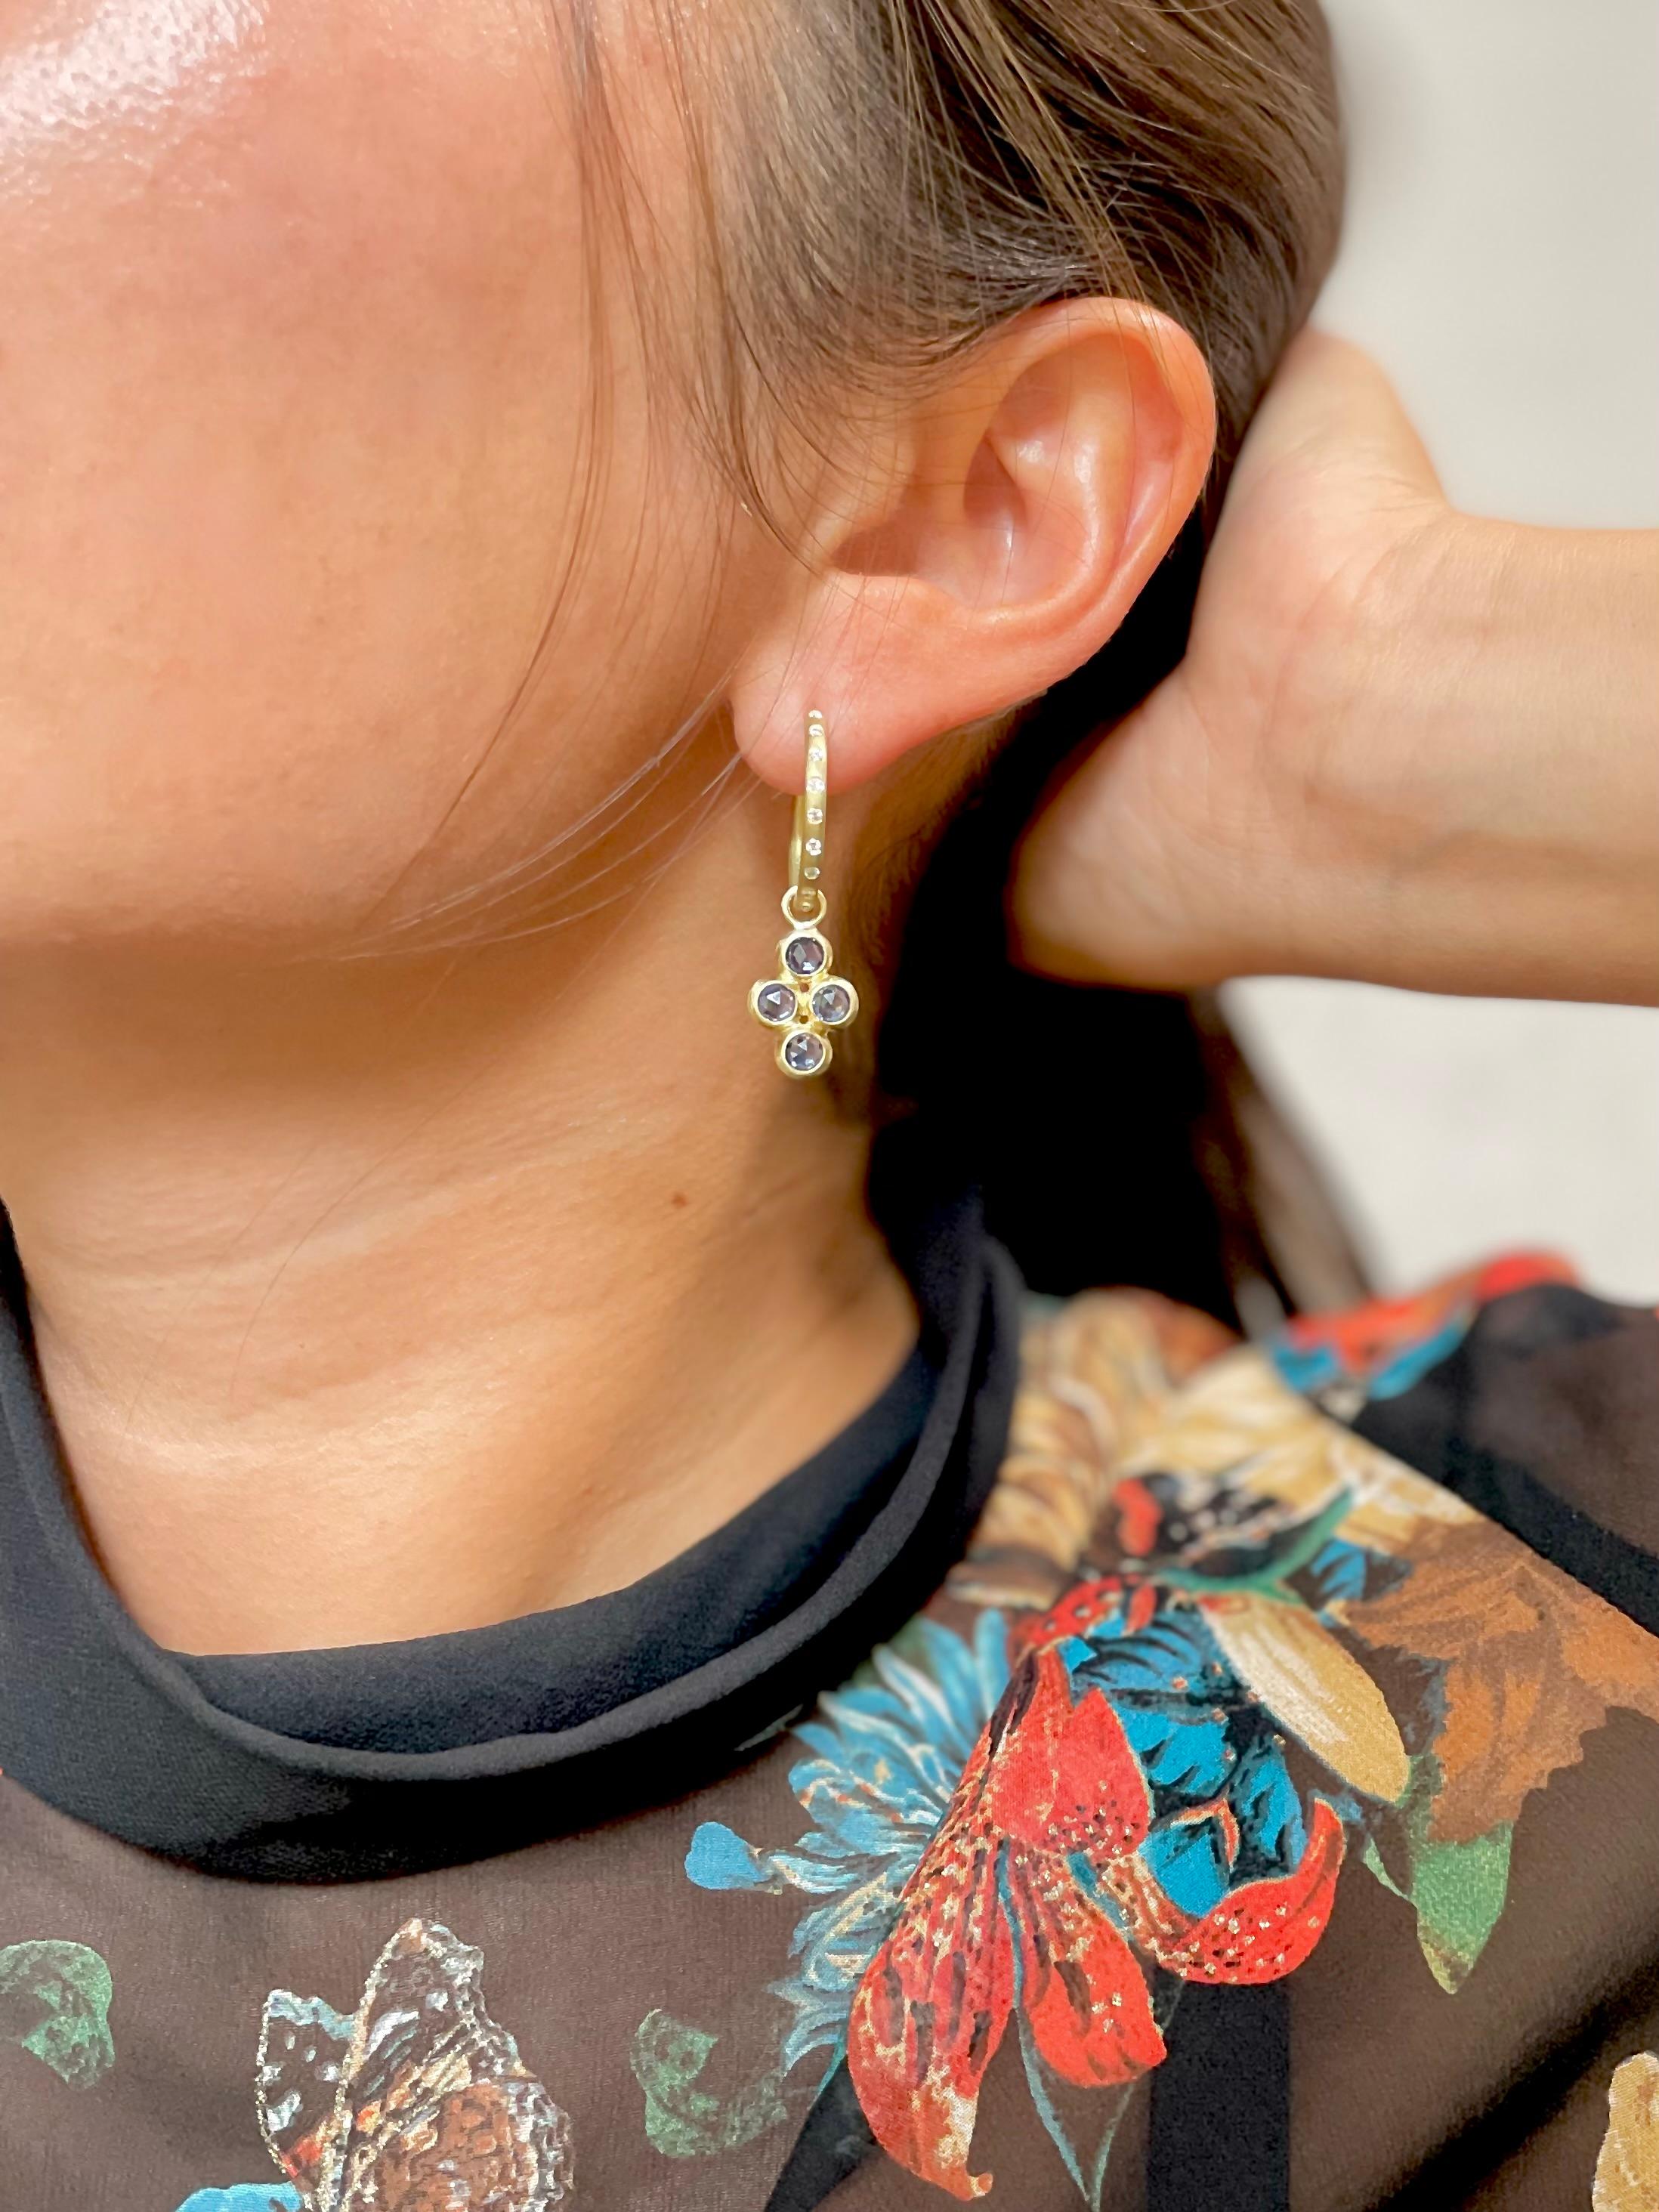 Faye Kim's 18 Karat Gold Hoops with Detachable Blue Sapphire Quad Bezel Rose Cut Drops - The
hoops can be worn separately. The drops can be attached to many of Faye's other hoops, allowing for mixing and matching, adding style and sparkle to any